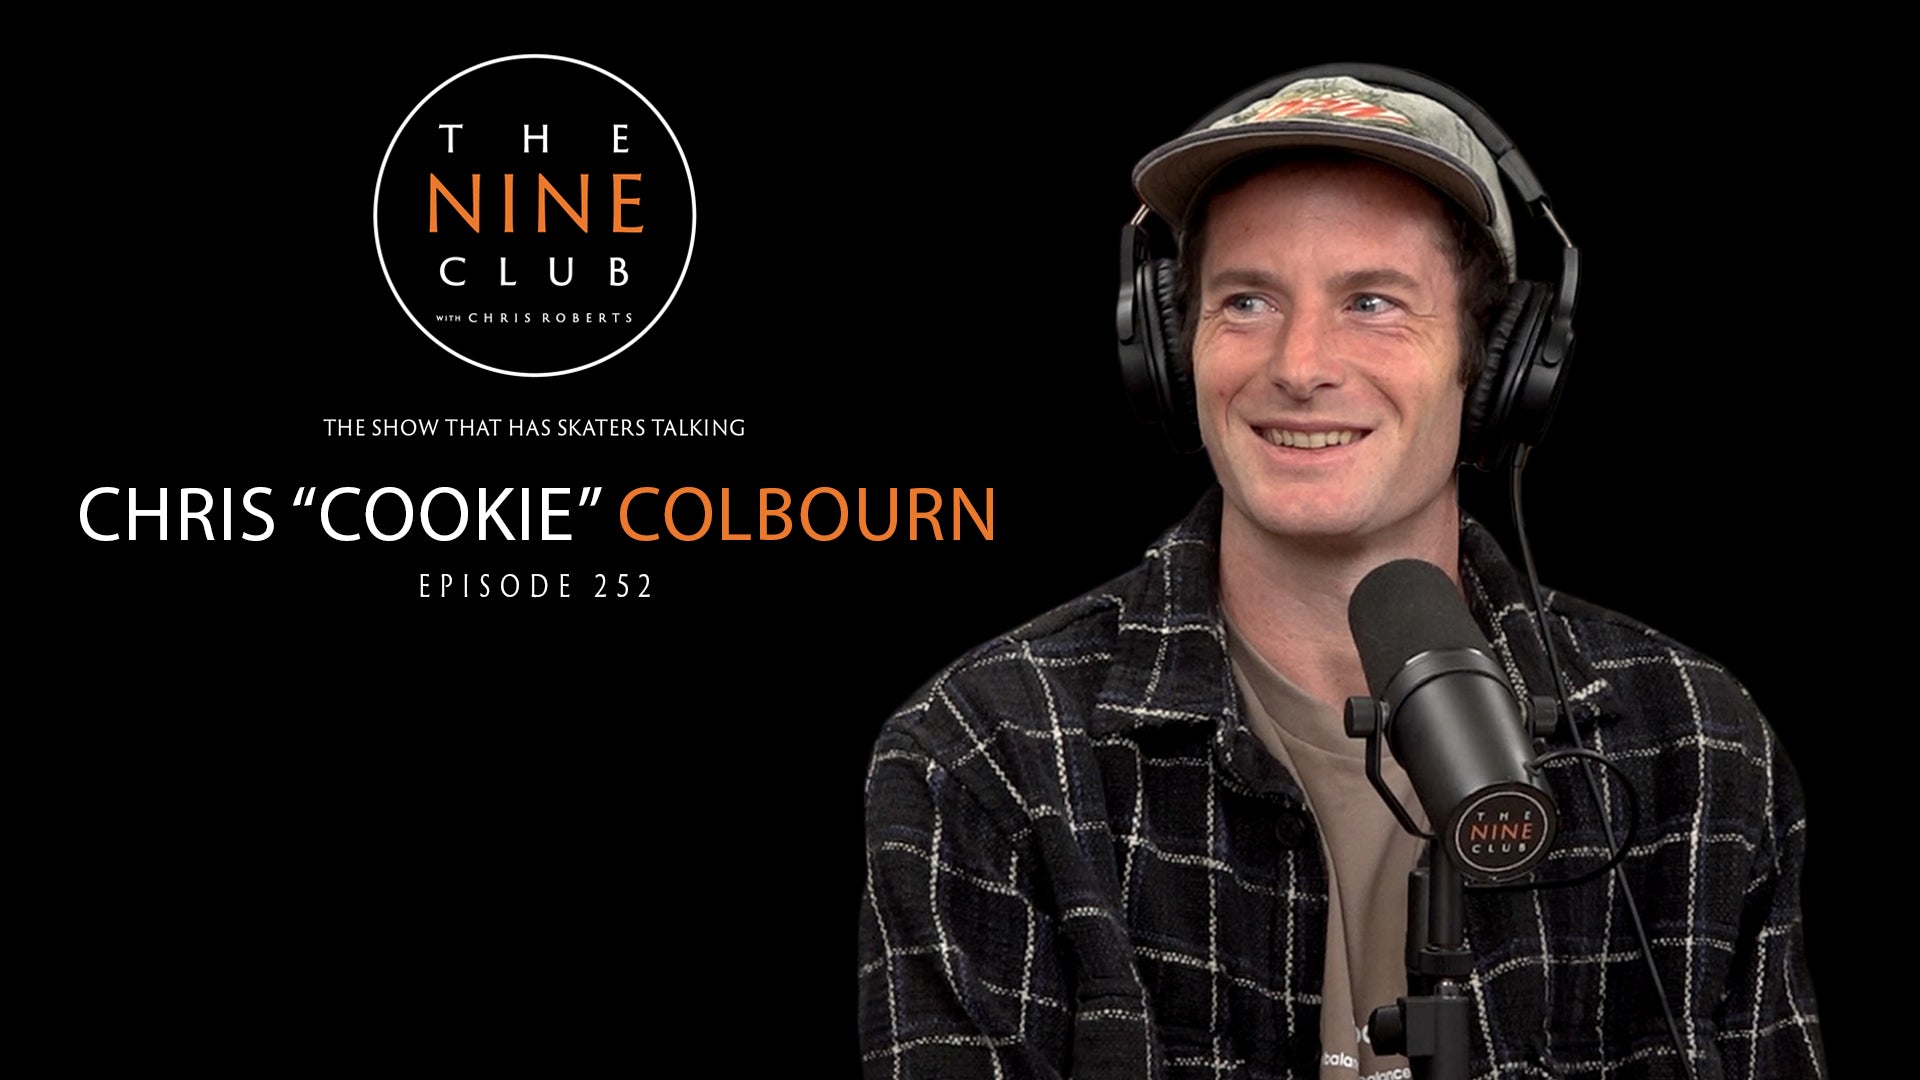 Chris “Cookie” Colbourn